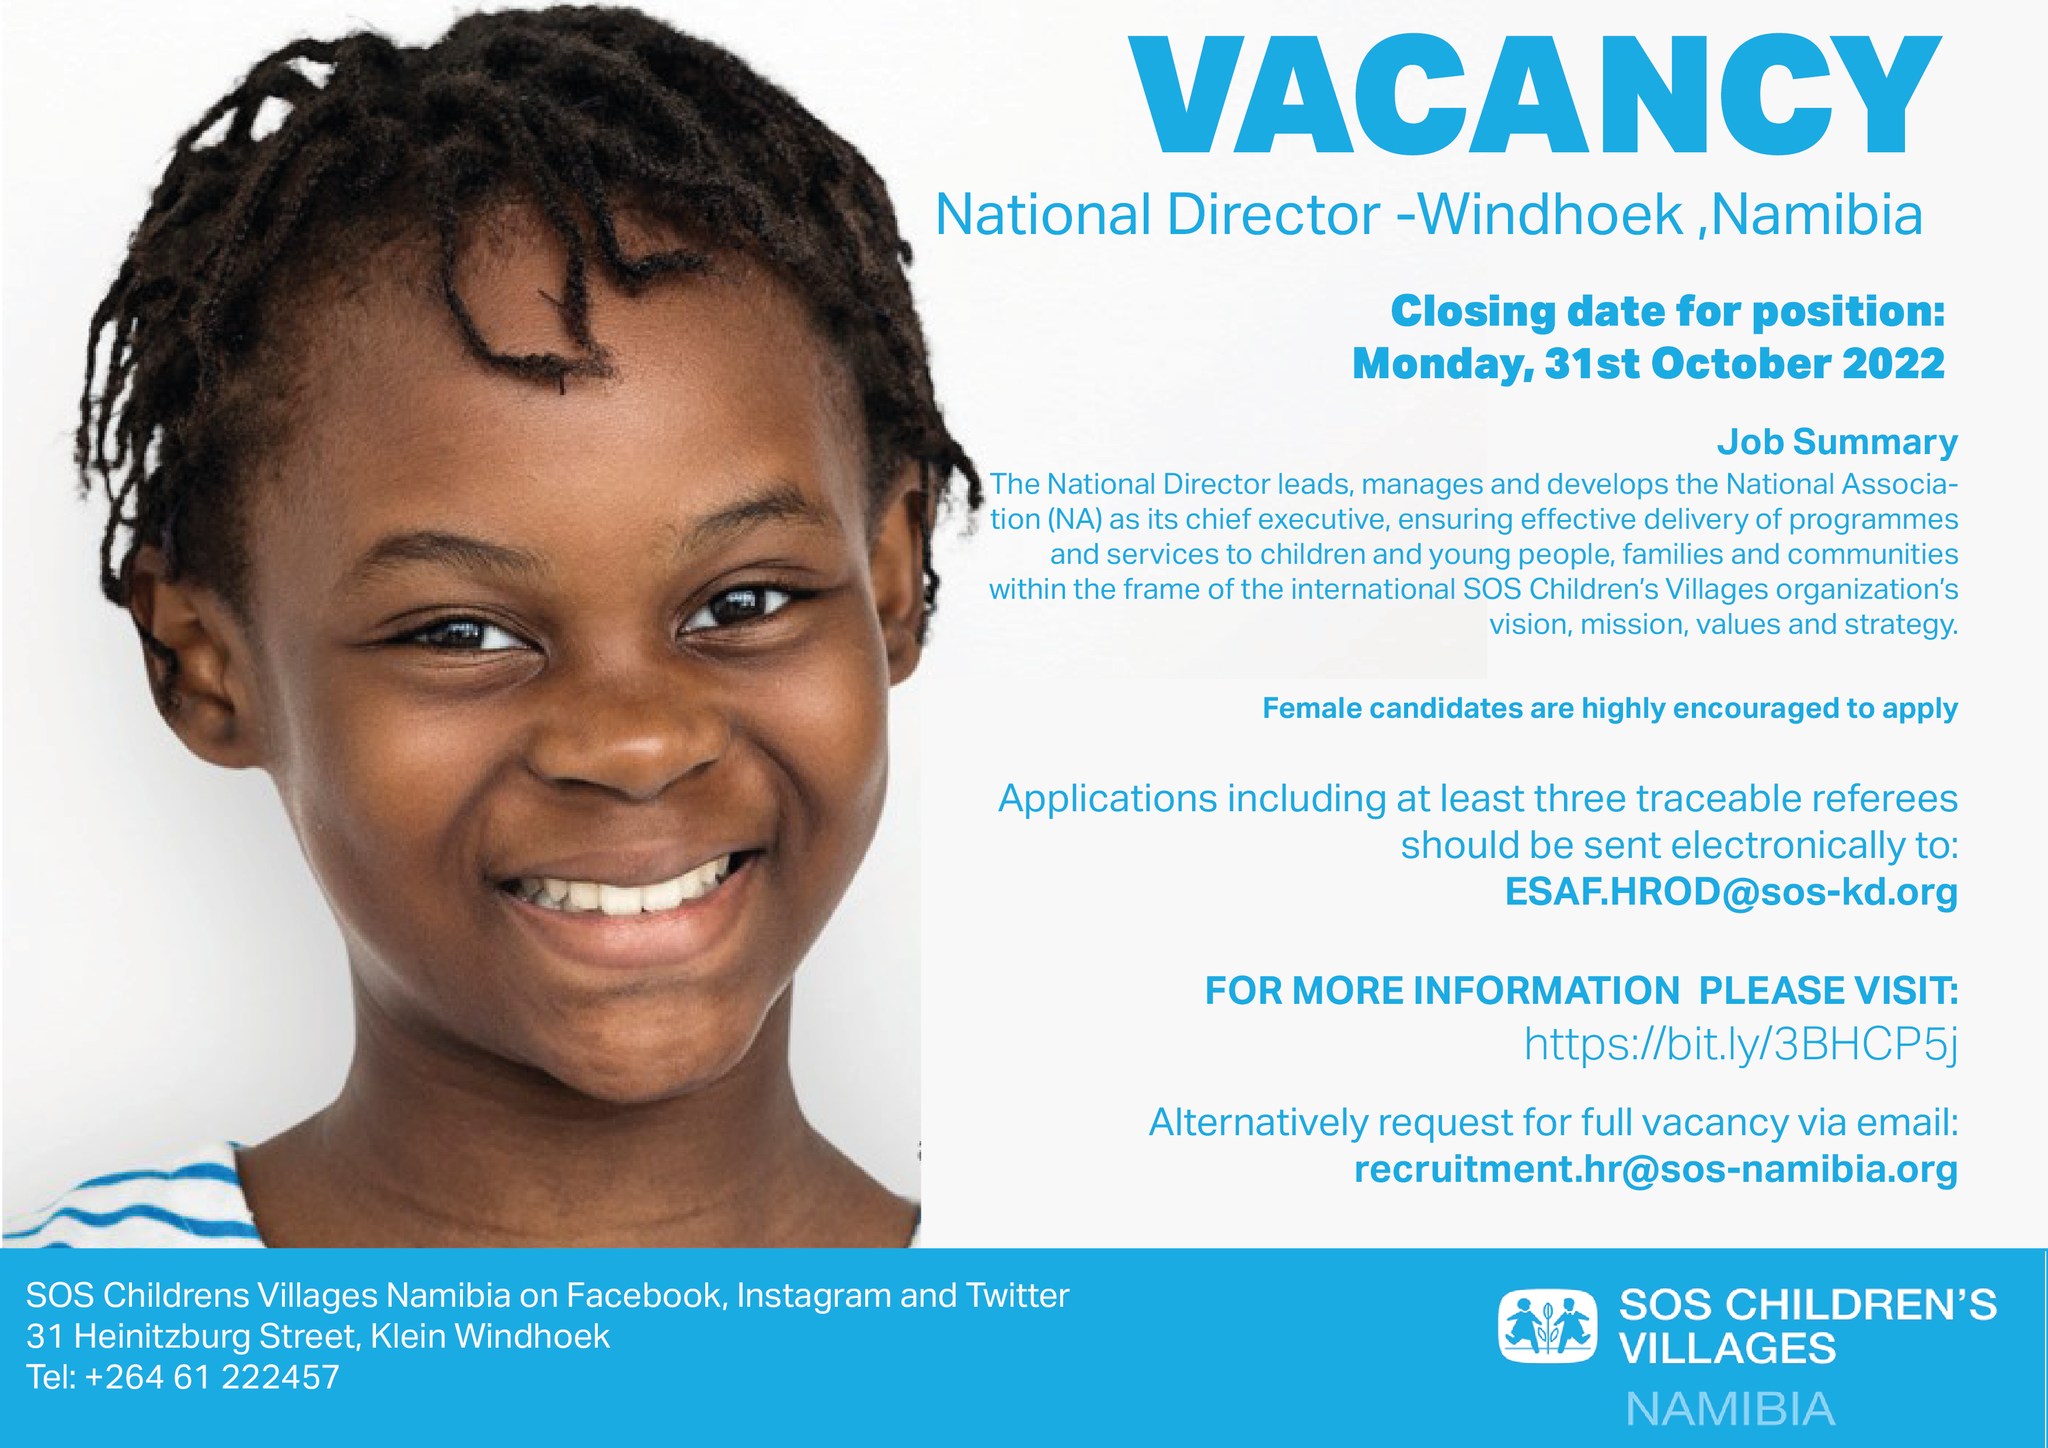 SOS Childrens Villages Namibia Vacancy National Director